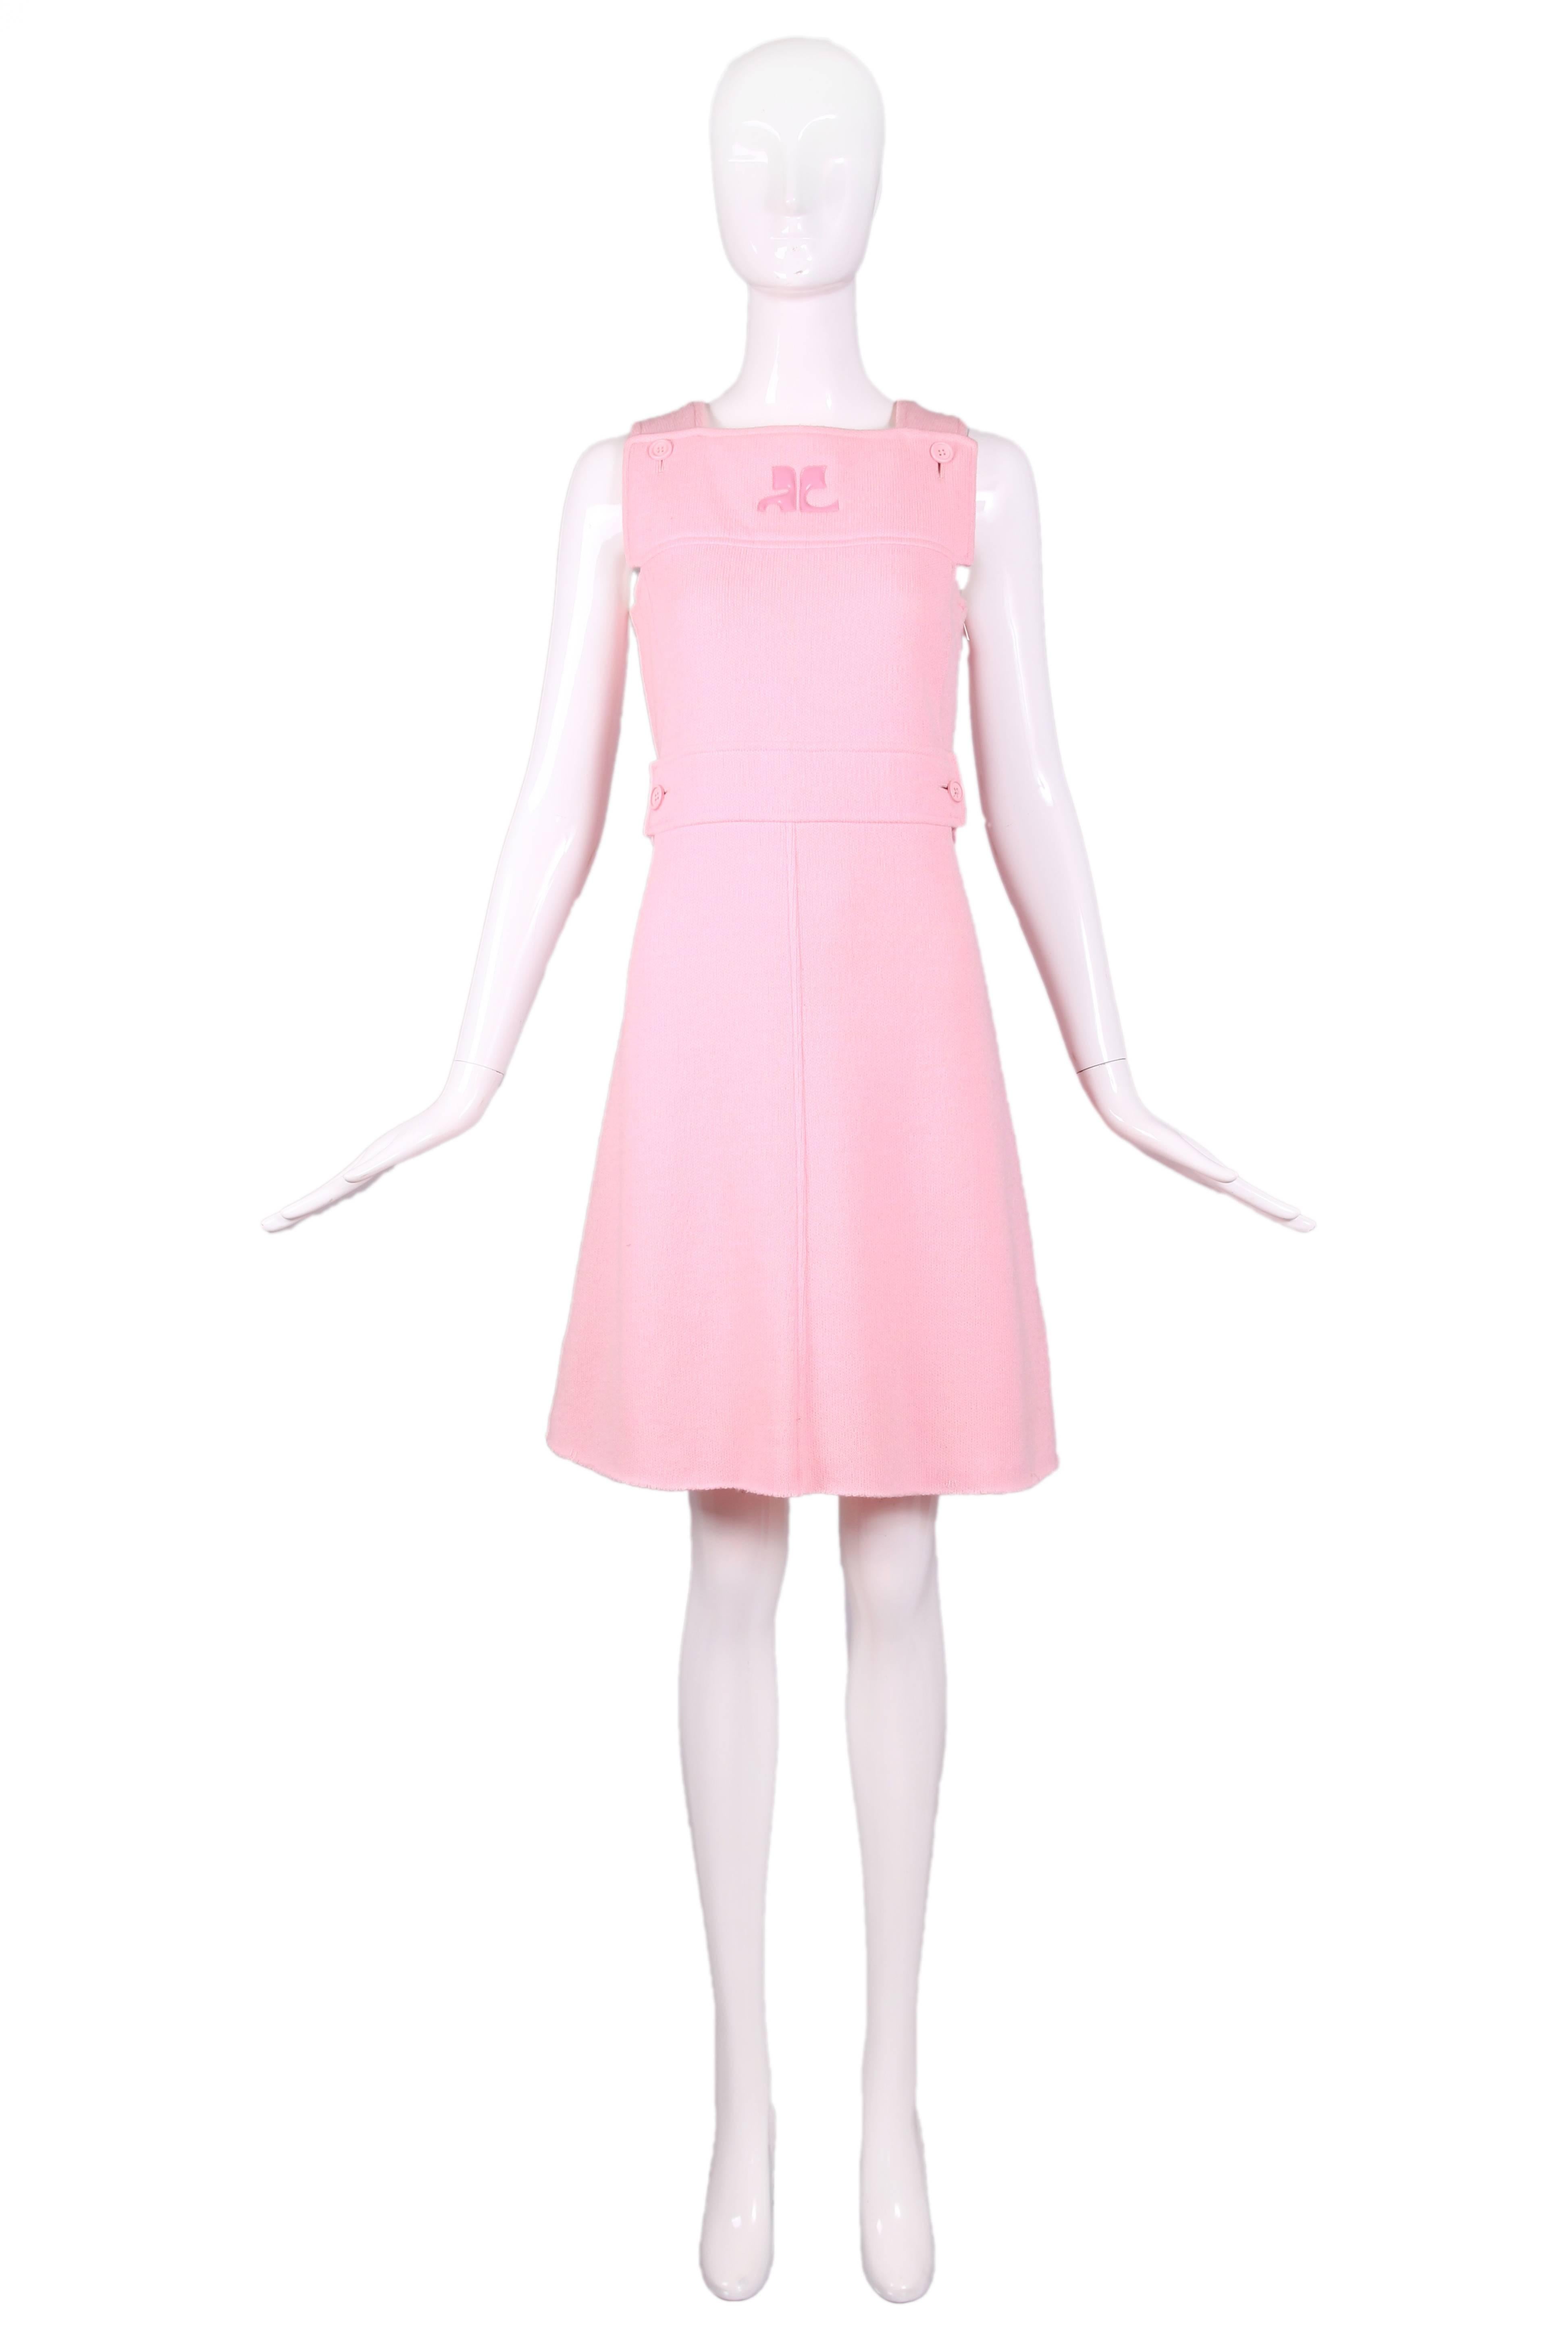 1973 Courreges baby pink wool pinafore dress with waist placket, pink button detail, and Courreges logo at center front. Side zipper closure and snap closure at strap. In excellent condition. Size Courreges b.
MEASUREMENTS:
Bust - 34"
Waist -